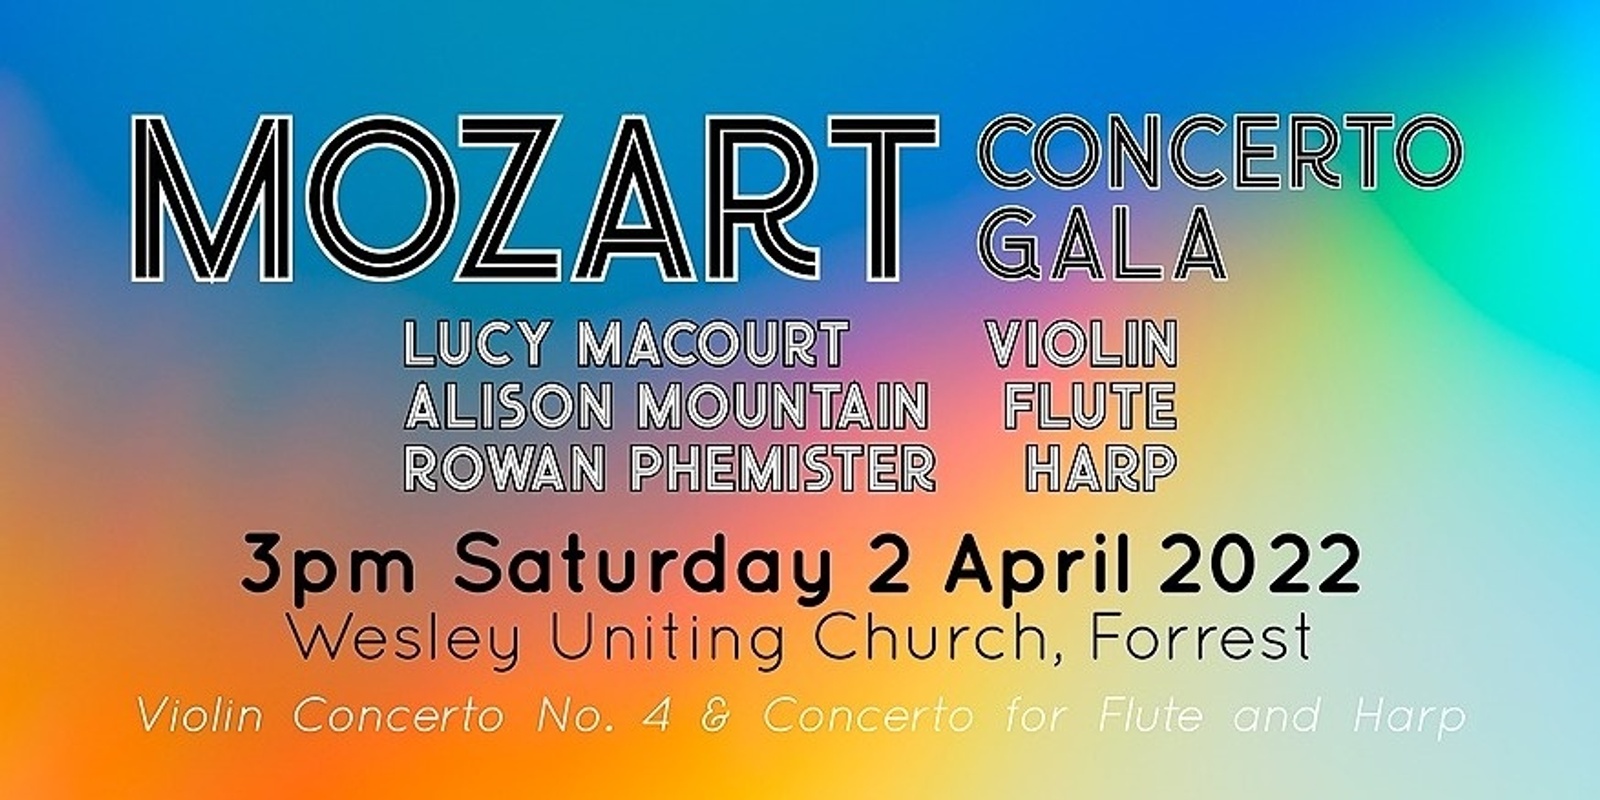 Banner image for Canberra Sinfonia: Mozart Concerto Gala